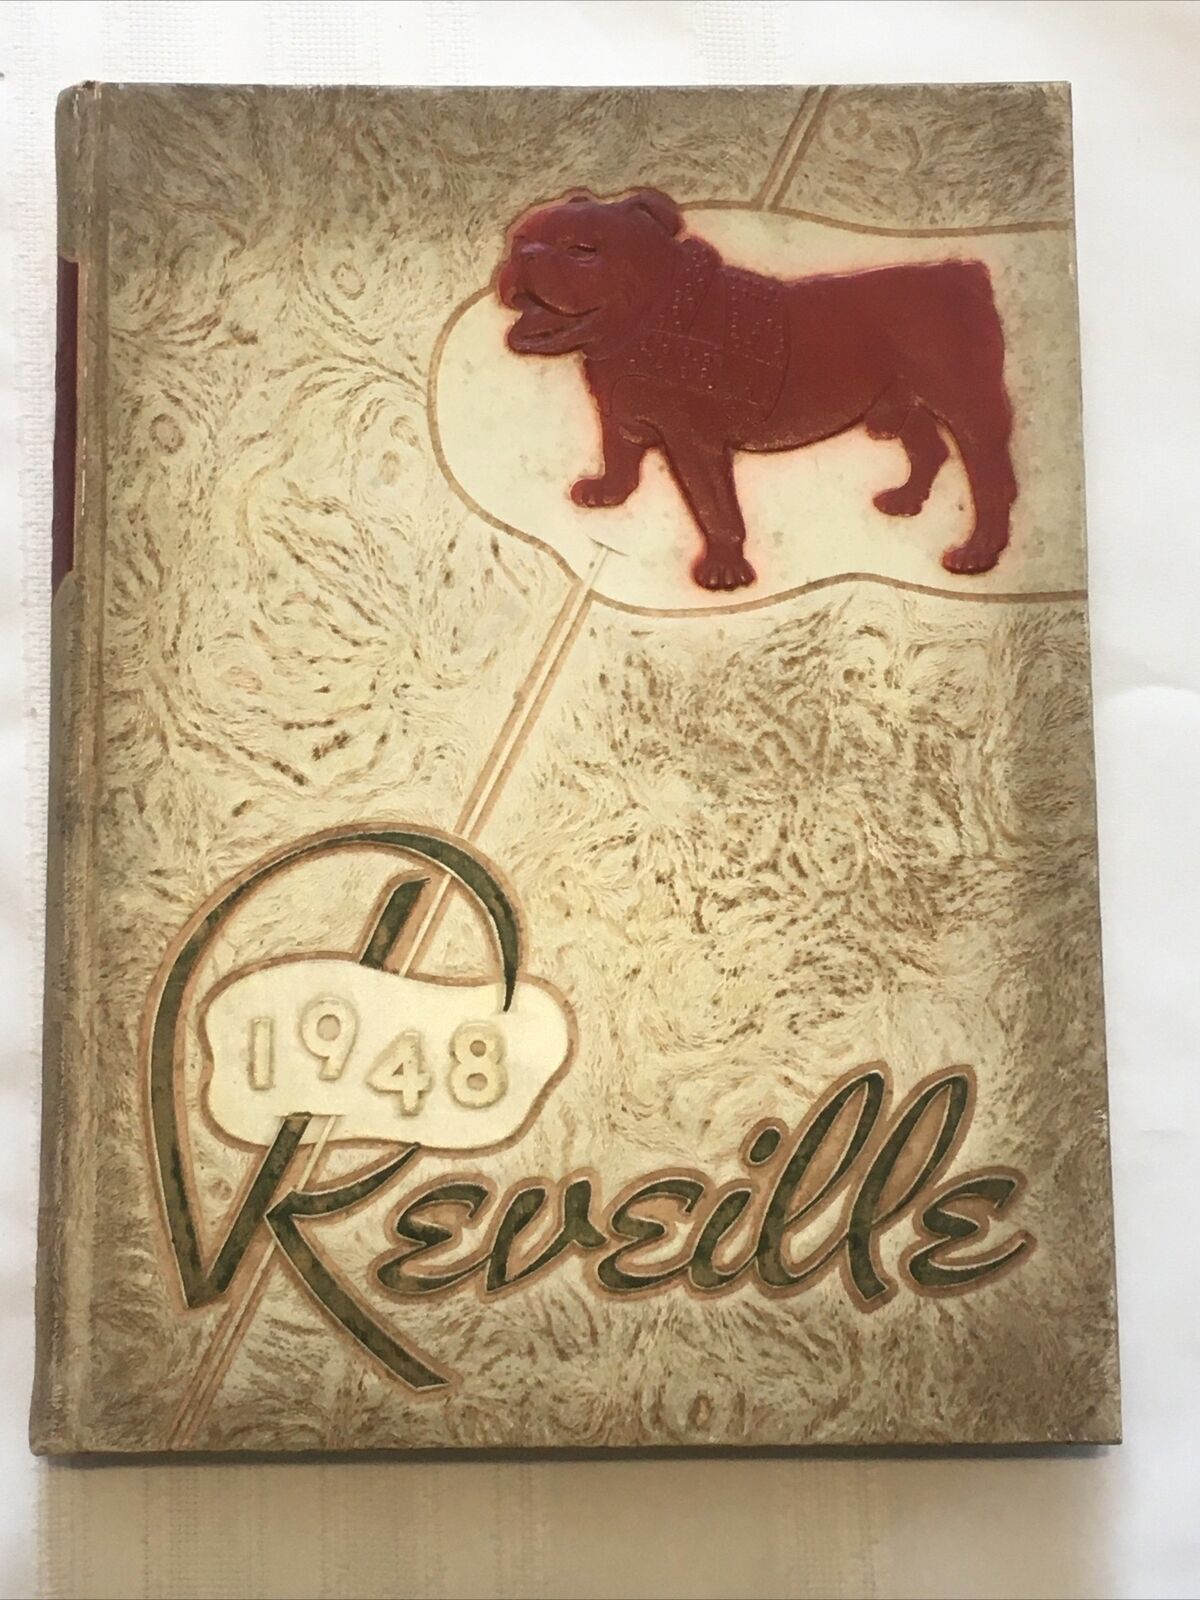 Mississippi State College 1948 The Reveille Yearbook.  Starkville. Segregated